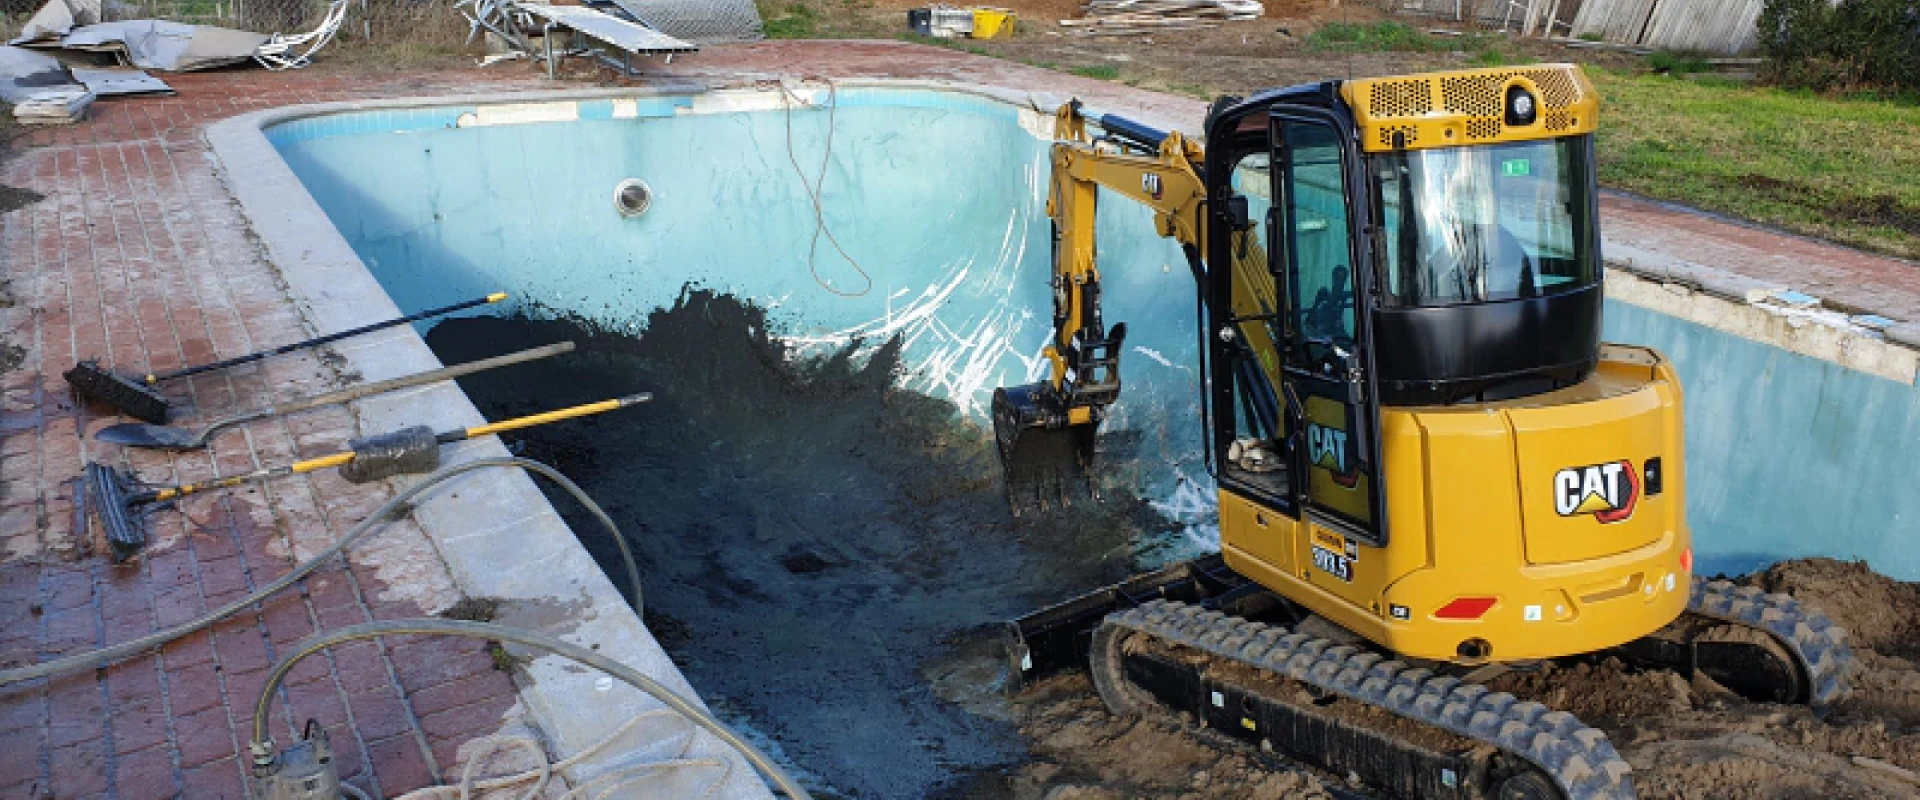 excavator working in a swimming pool